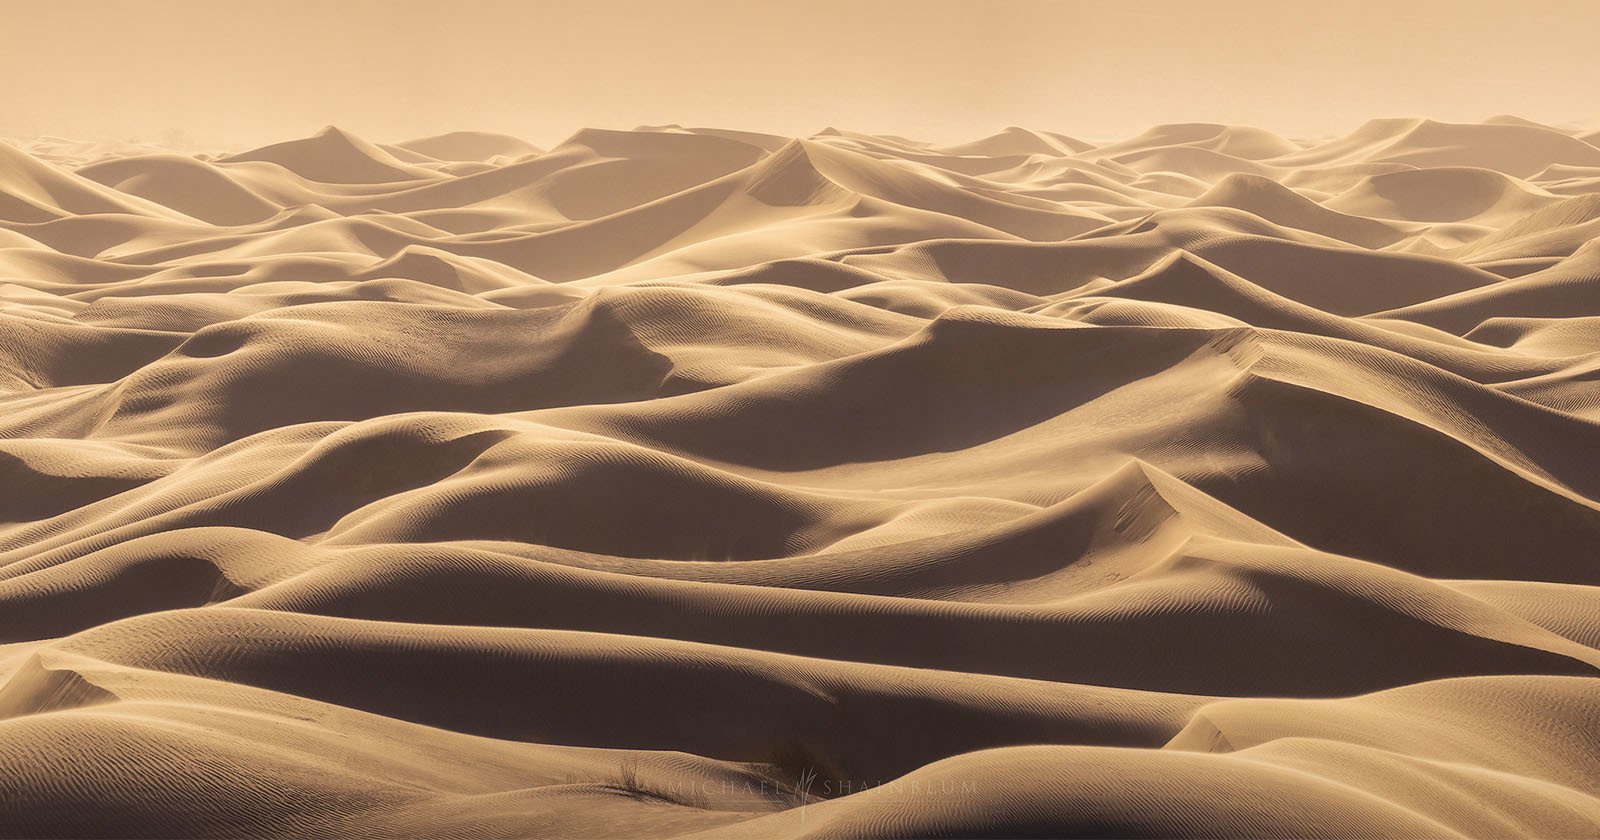 Photographing Wind-Swept Sand Dunes in Death Valley